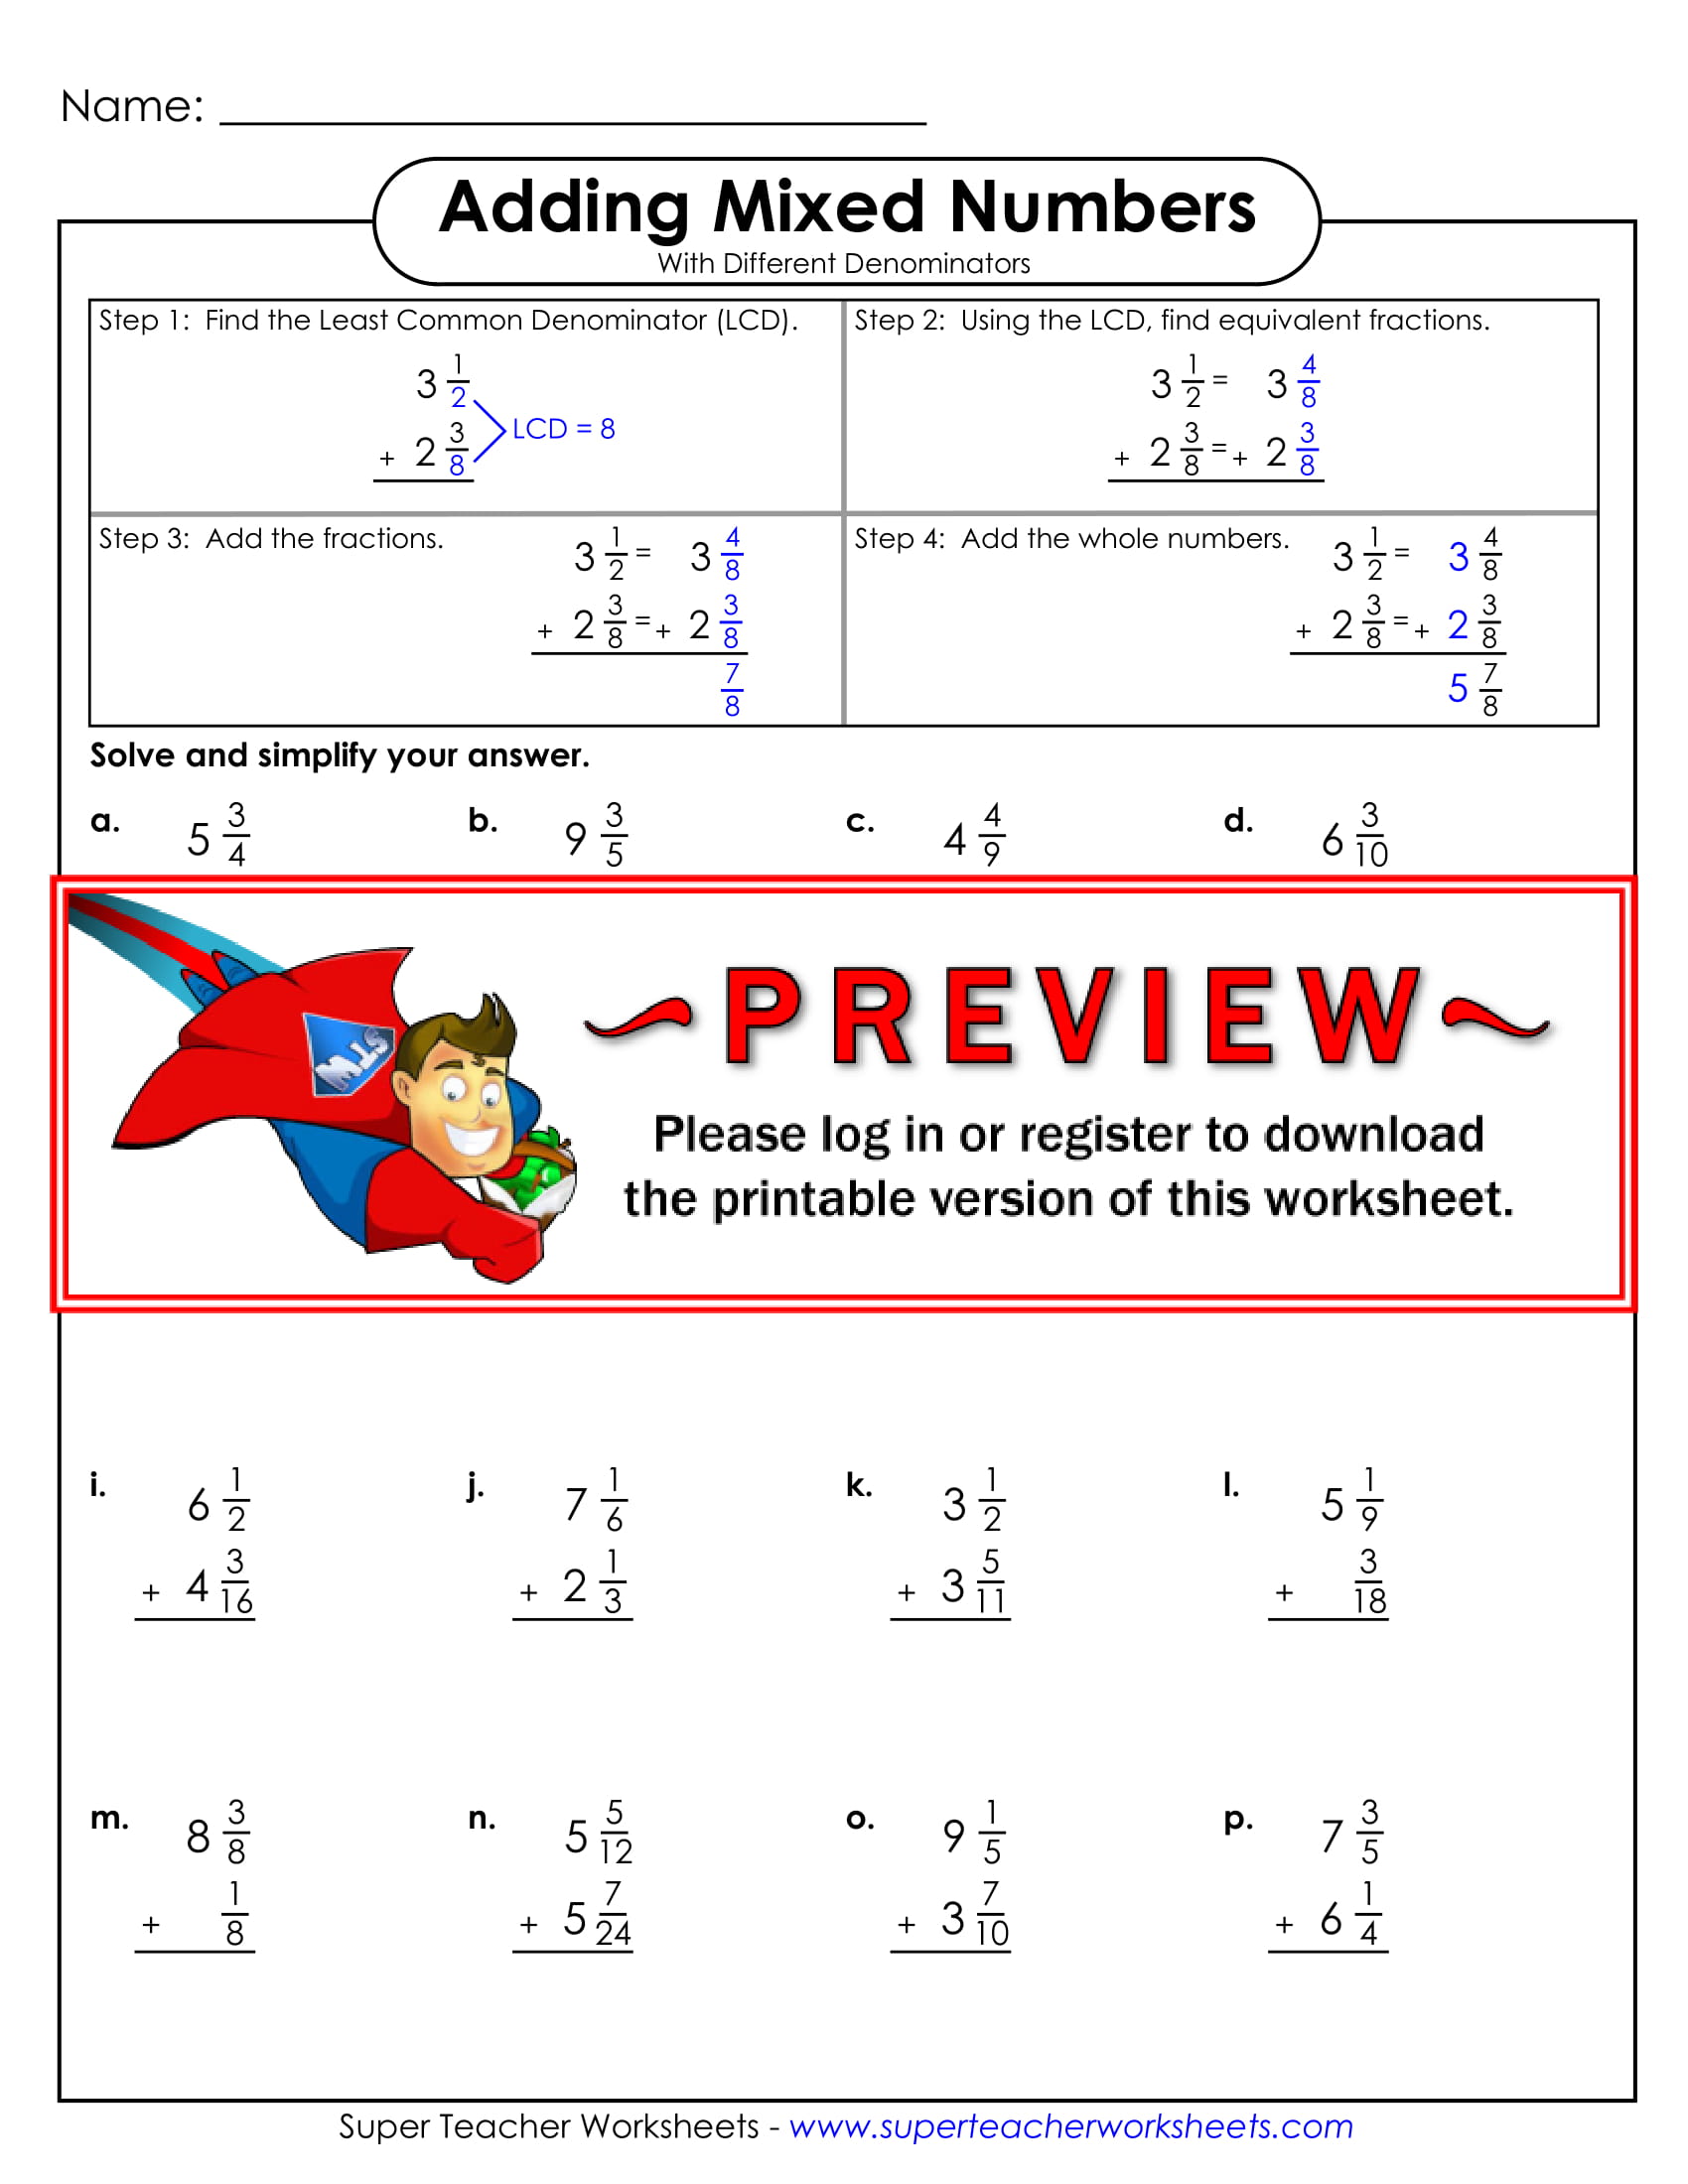 Free Teachers Worksheets On Adding Mixed Numbers